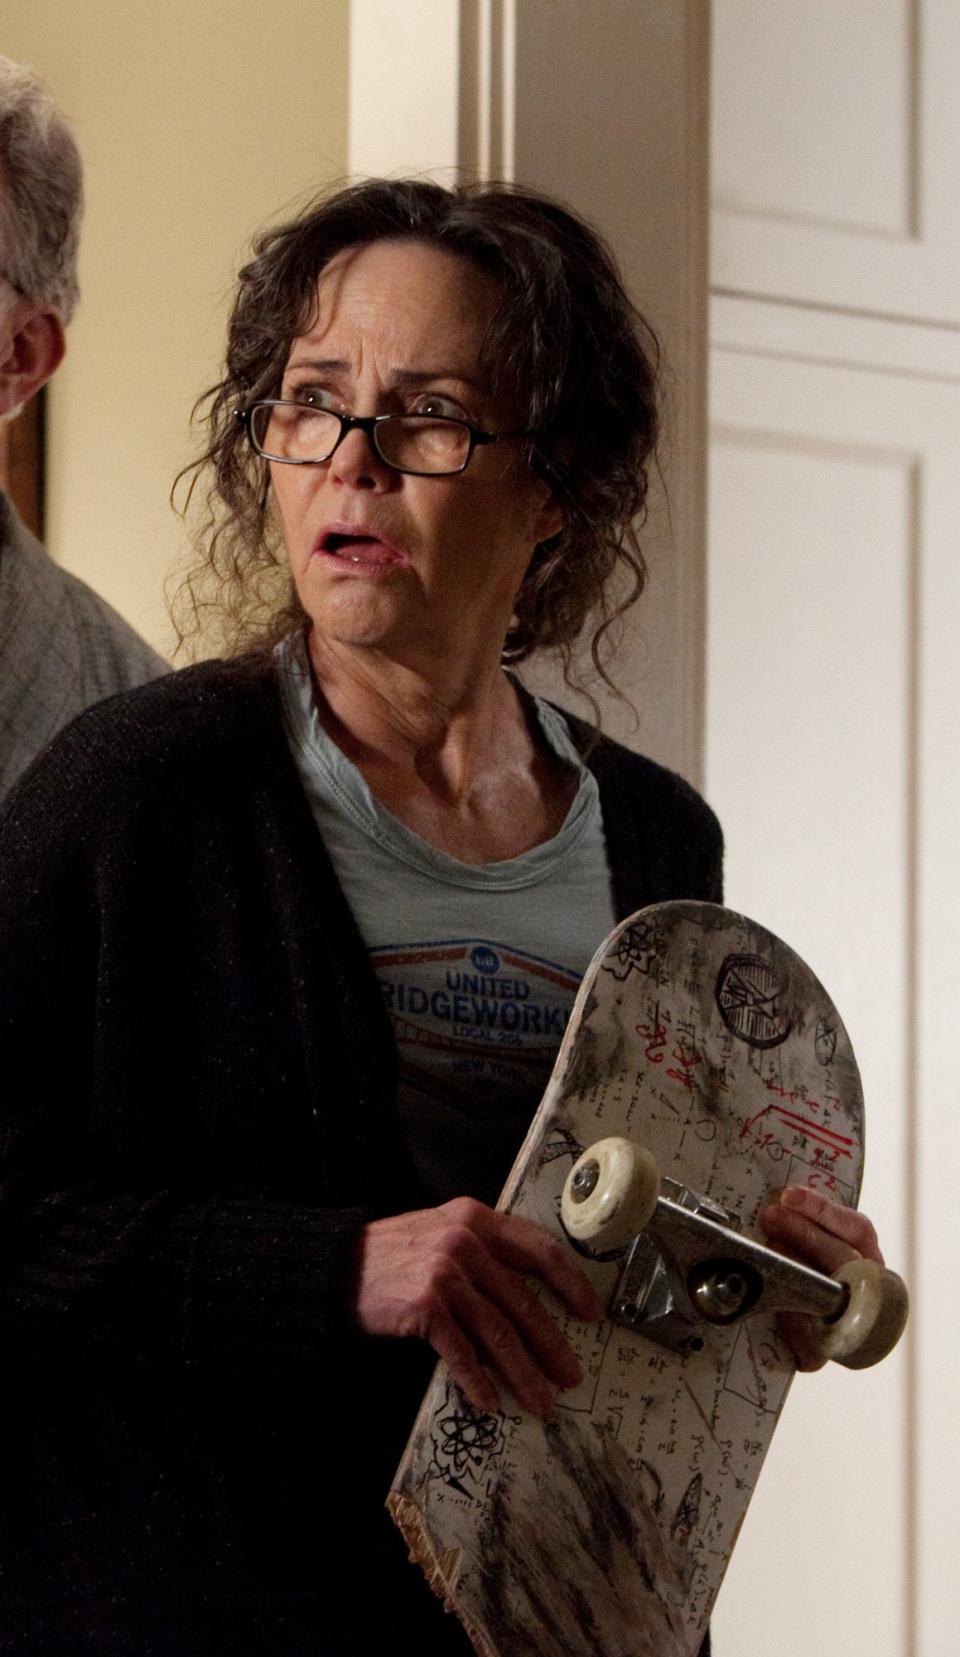 Aunt May picks up Peter's skateboard